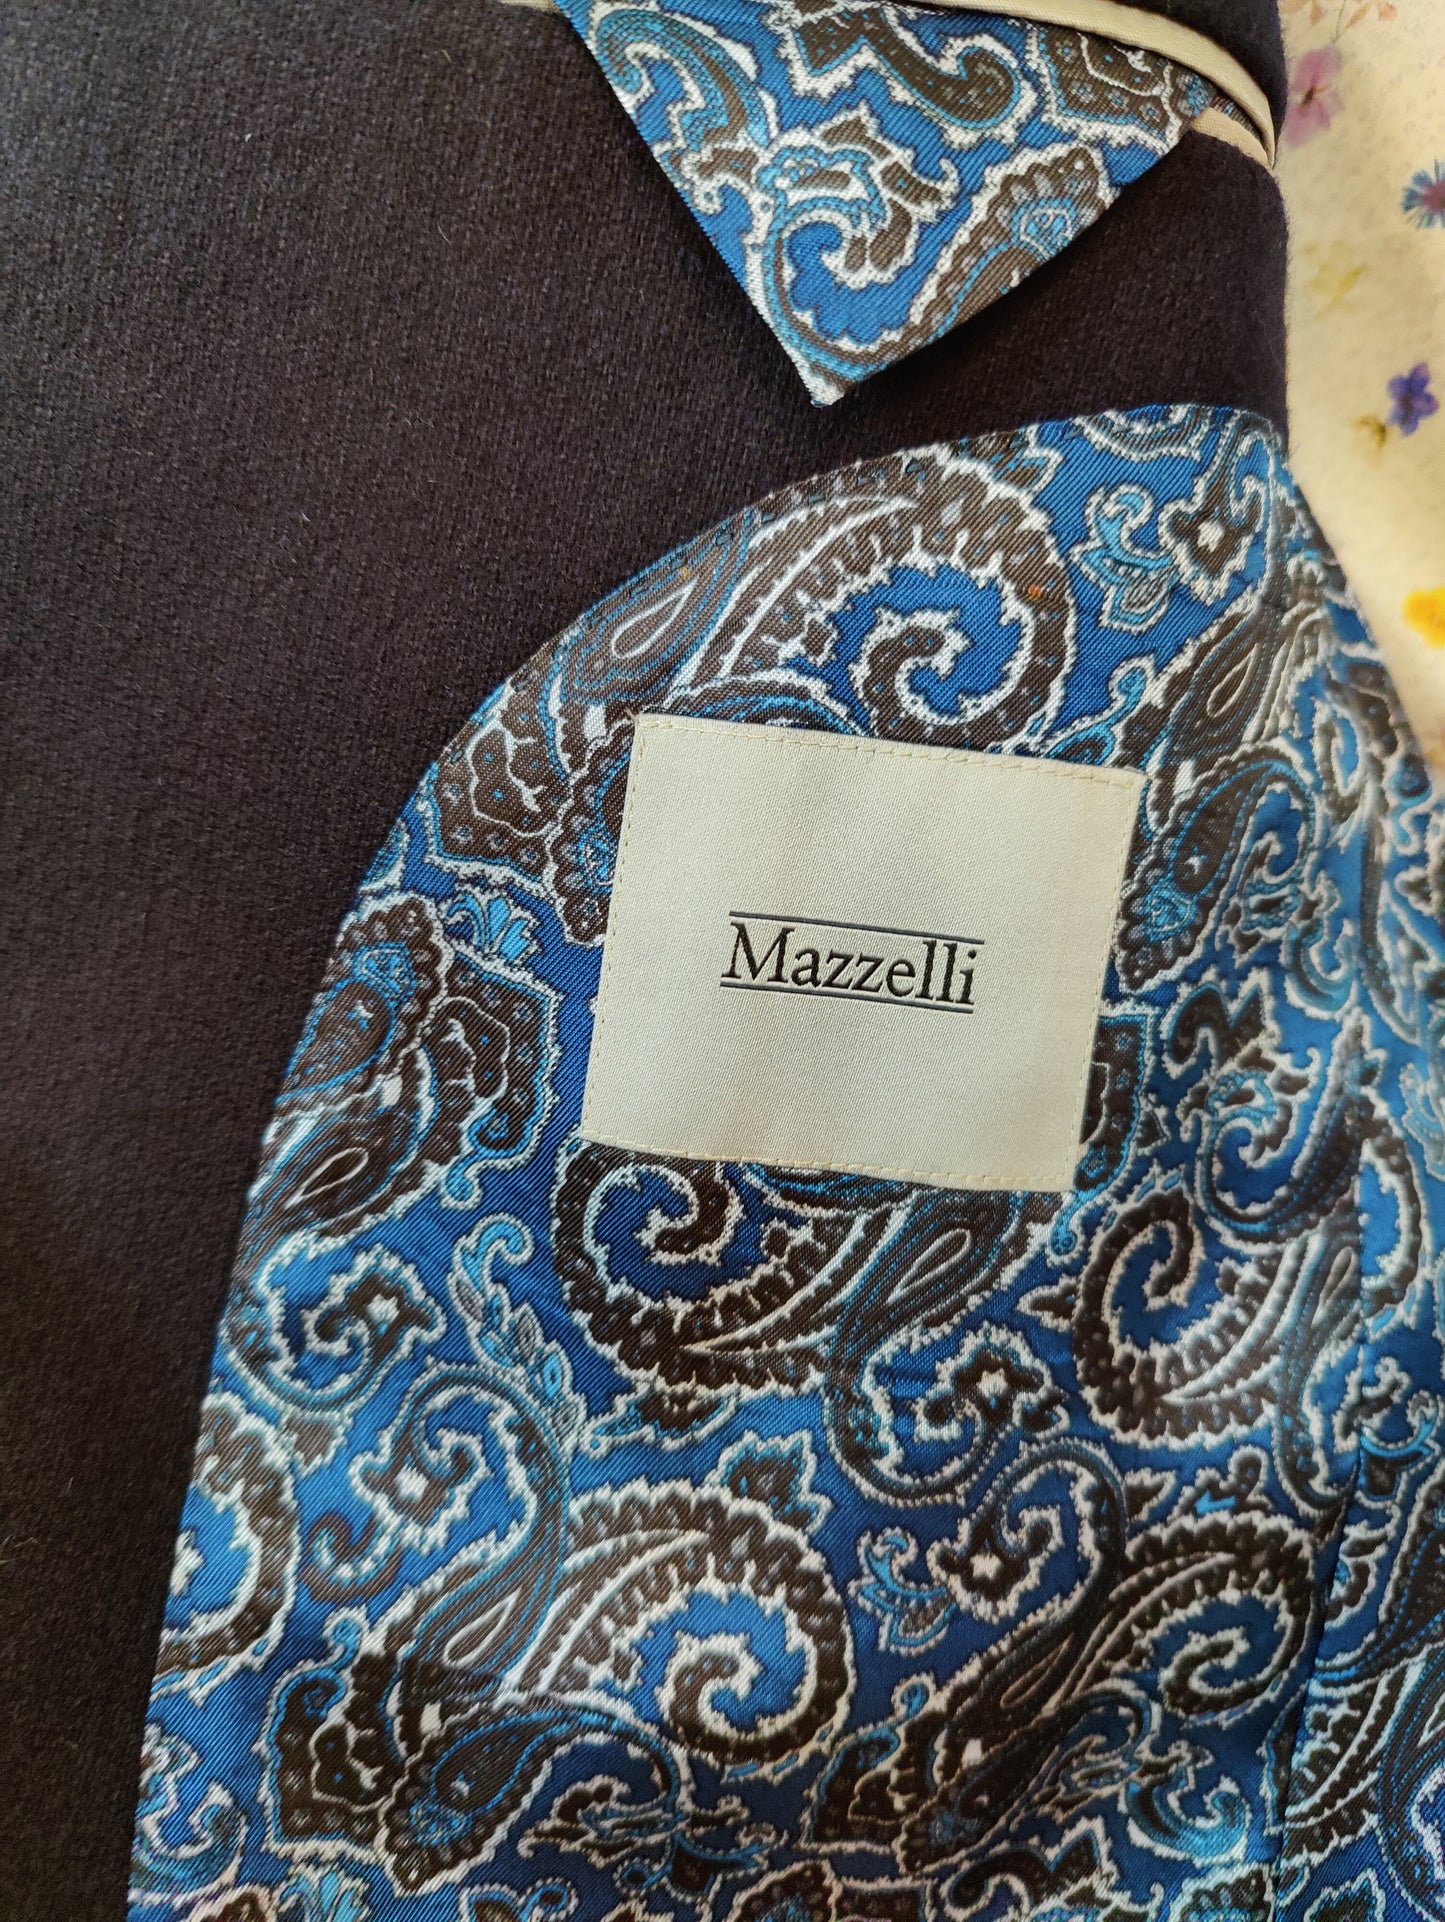 Dark navy with light blue details by Mazzelli